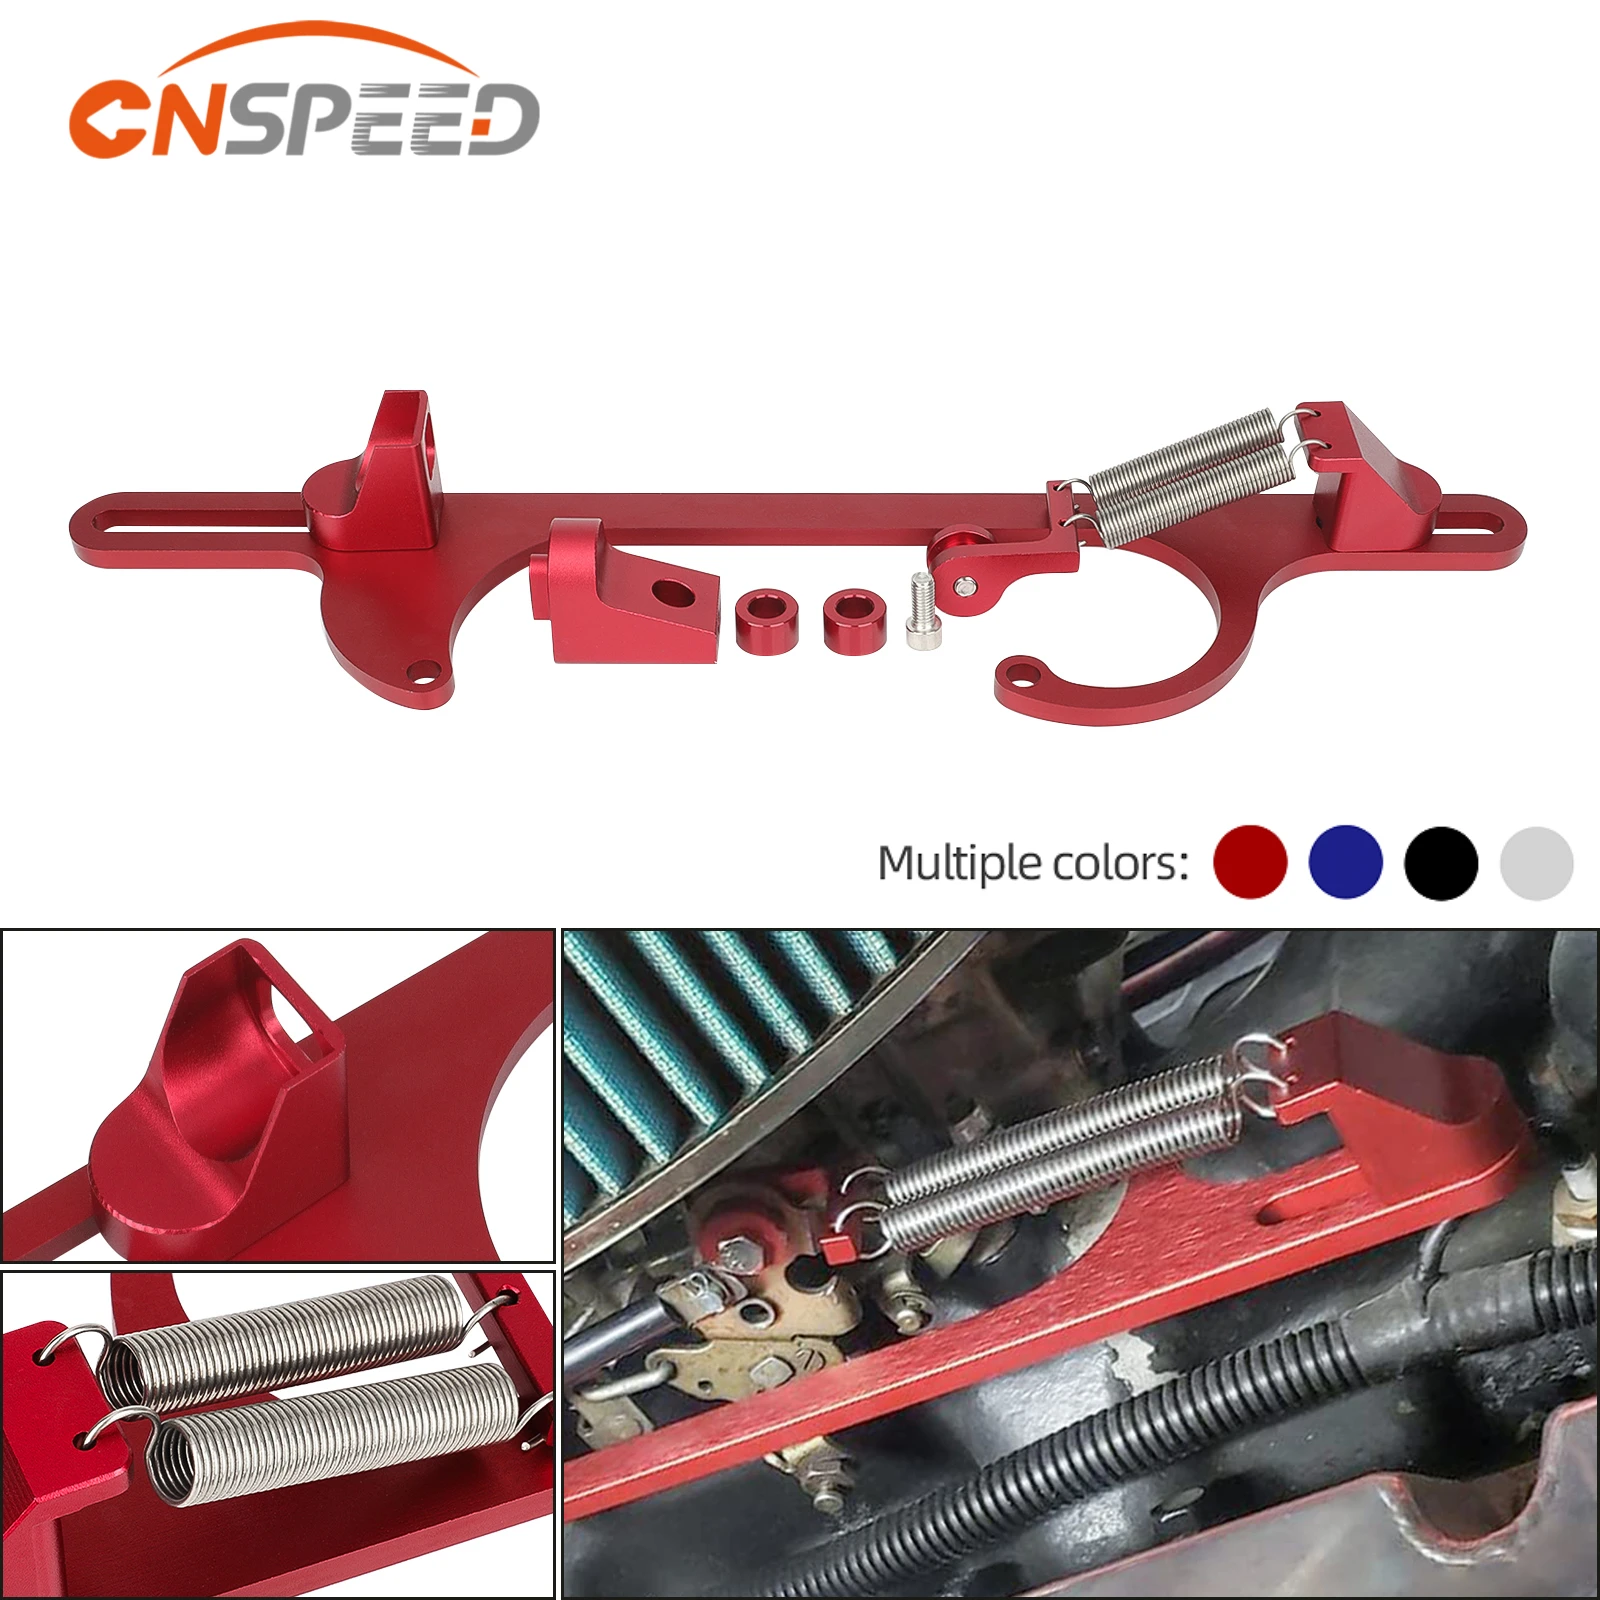 

CNSPEED Billet Aluminum Adjustable Throttle Cable Bracket For Ford cable Fit Quick Fuel 4150 and 4160 Carburetor 350 FF